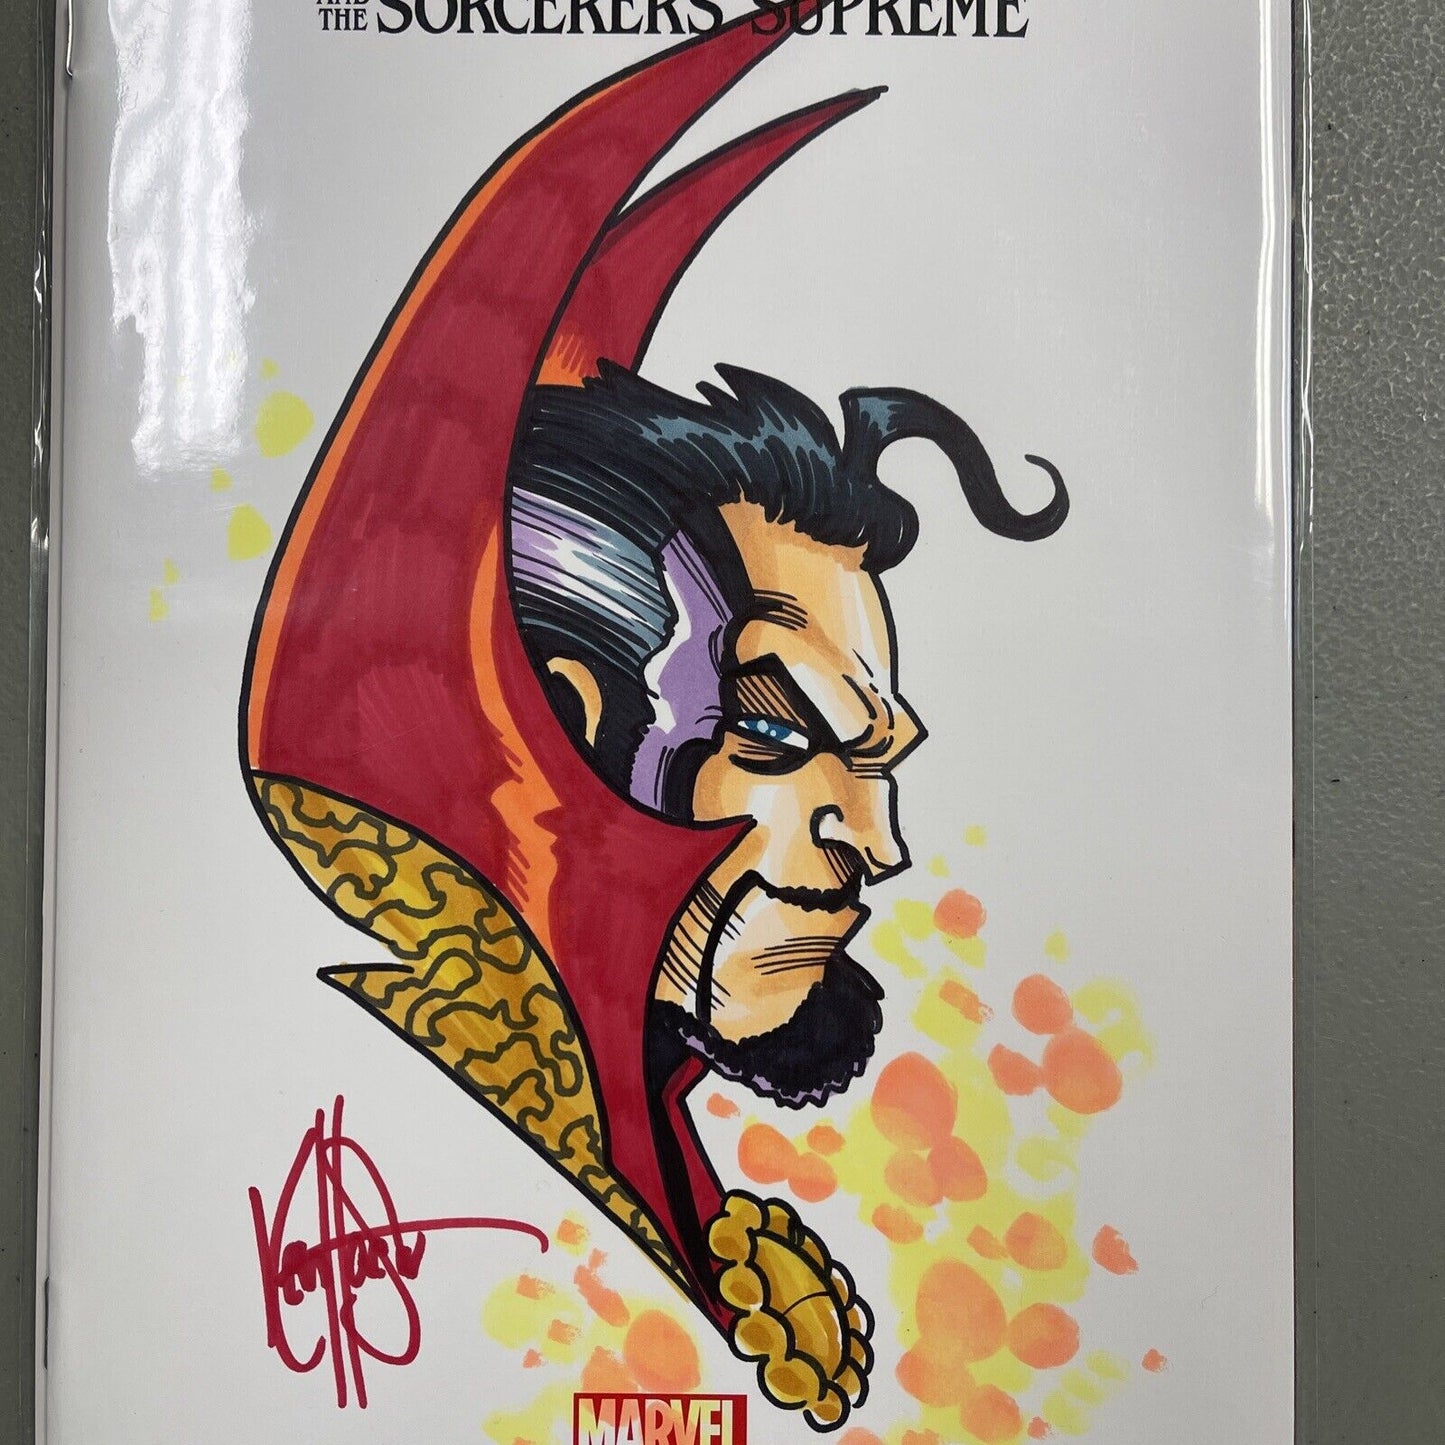 Doctor Strange And The Sorcerers Supreme 1 Dynamic Forces Hauser Sketch Cover